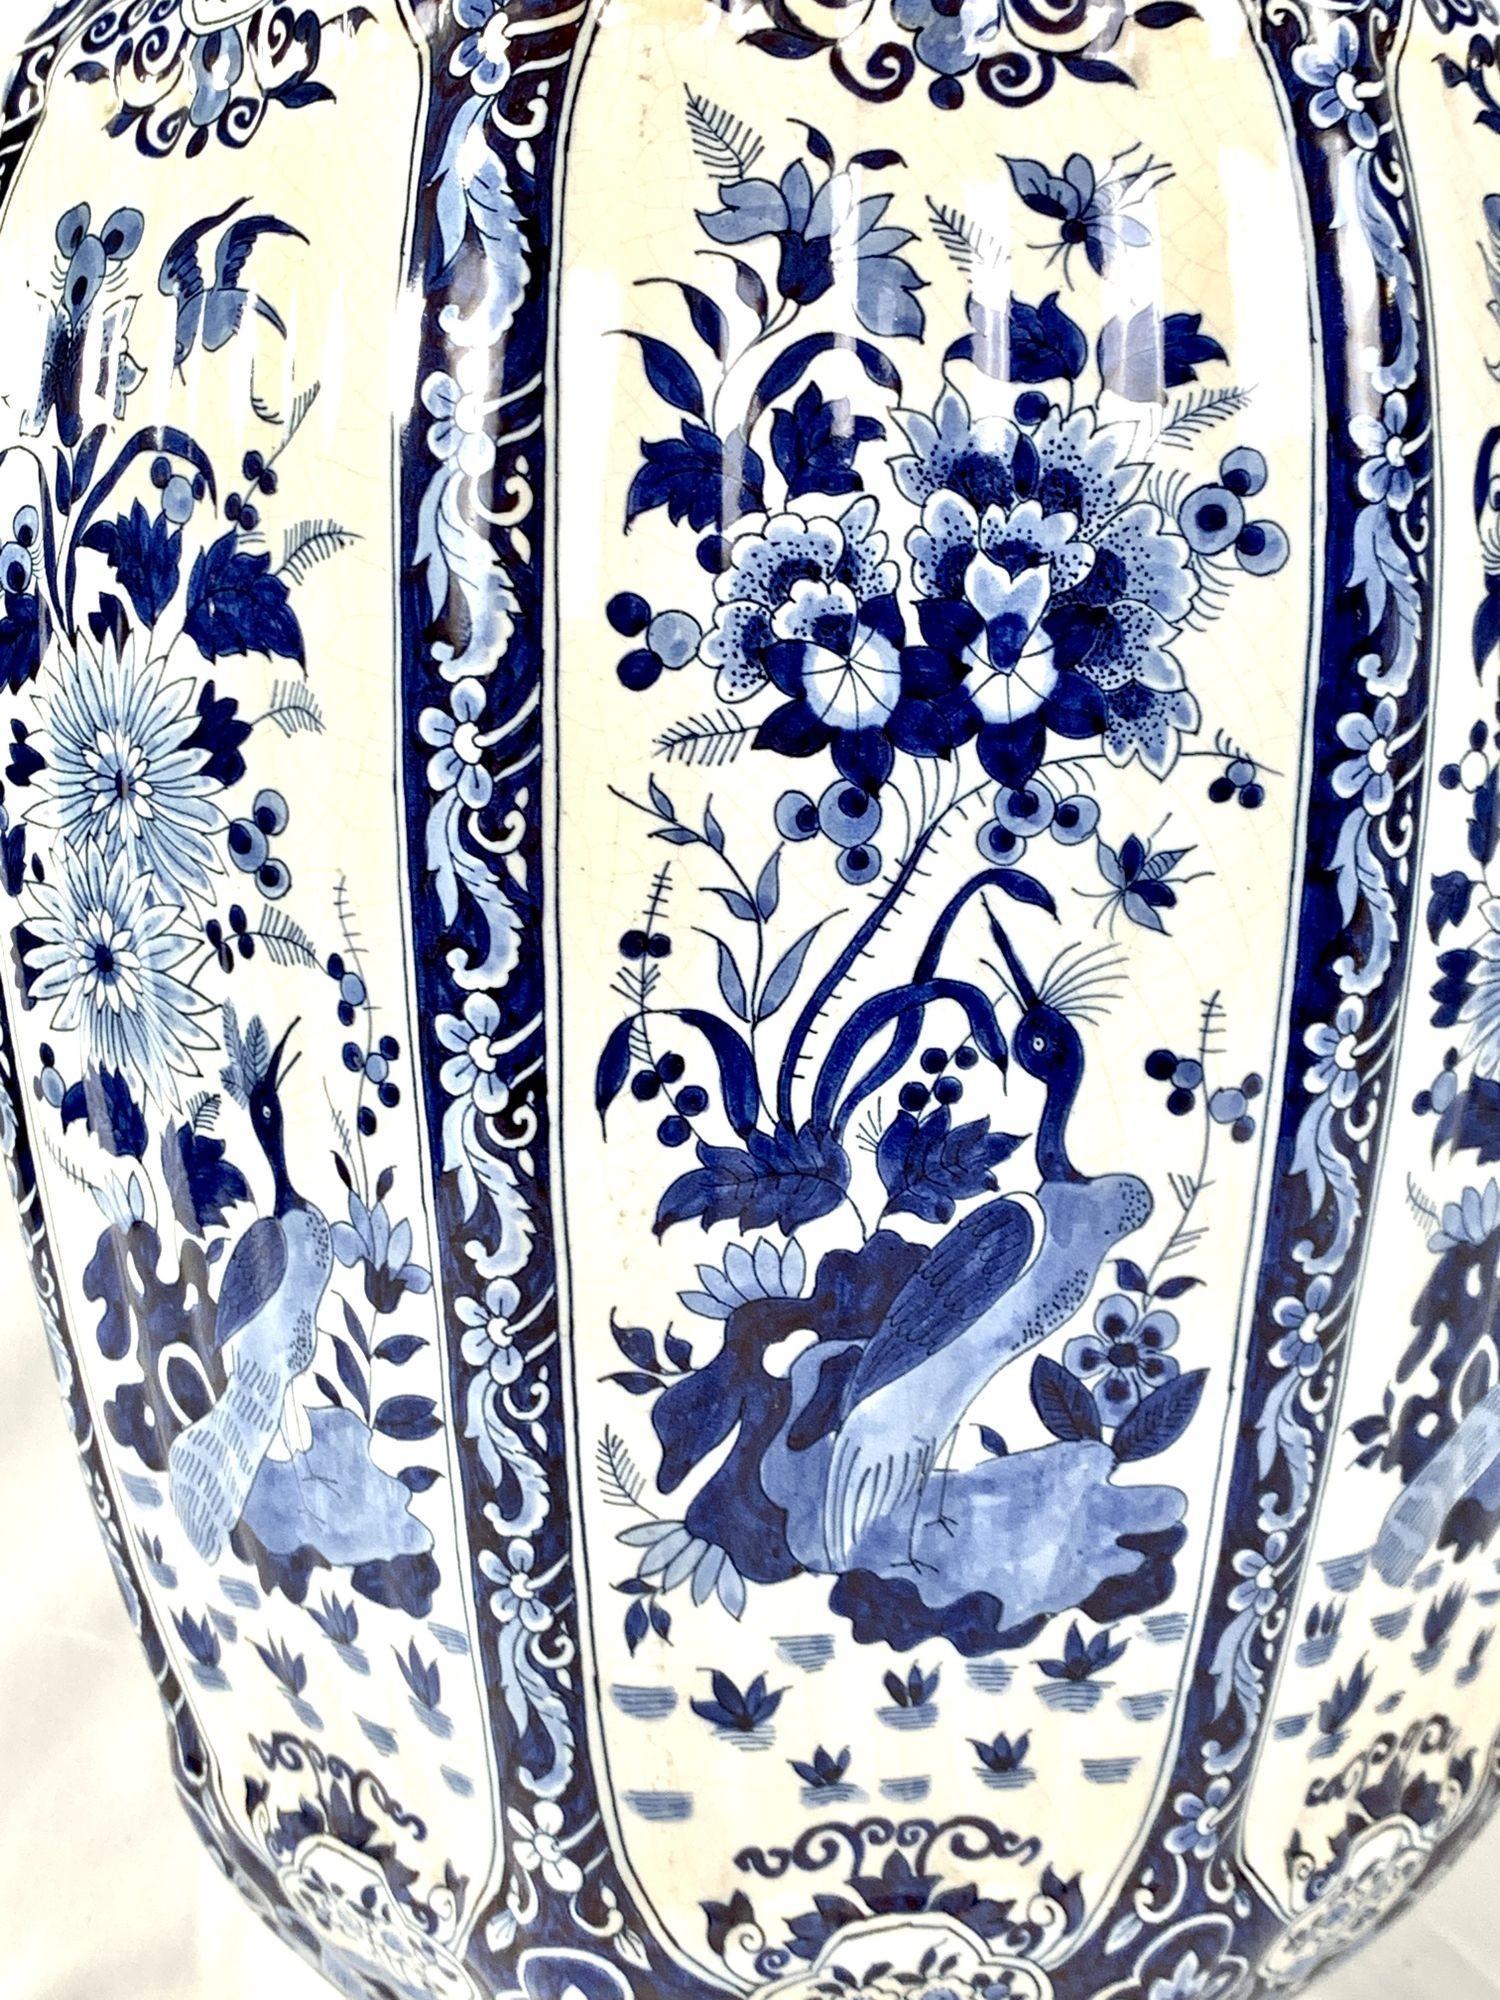 Blue and White Delft Jars and Vases Antique Grouping 18th-19th Centuries 2